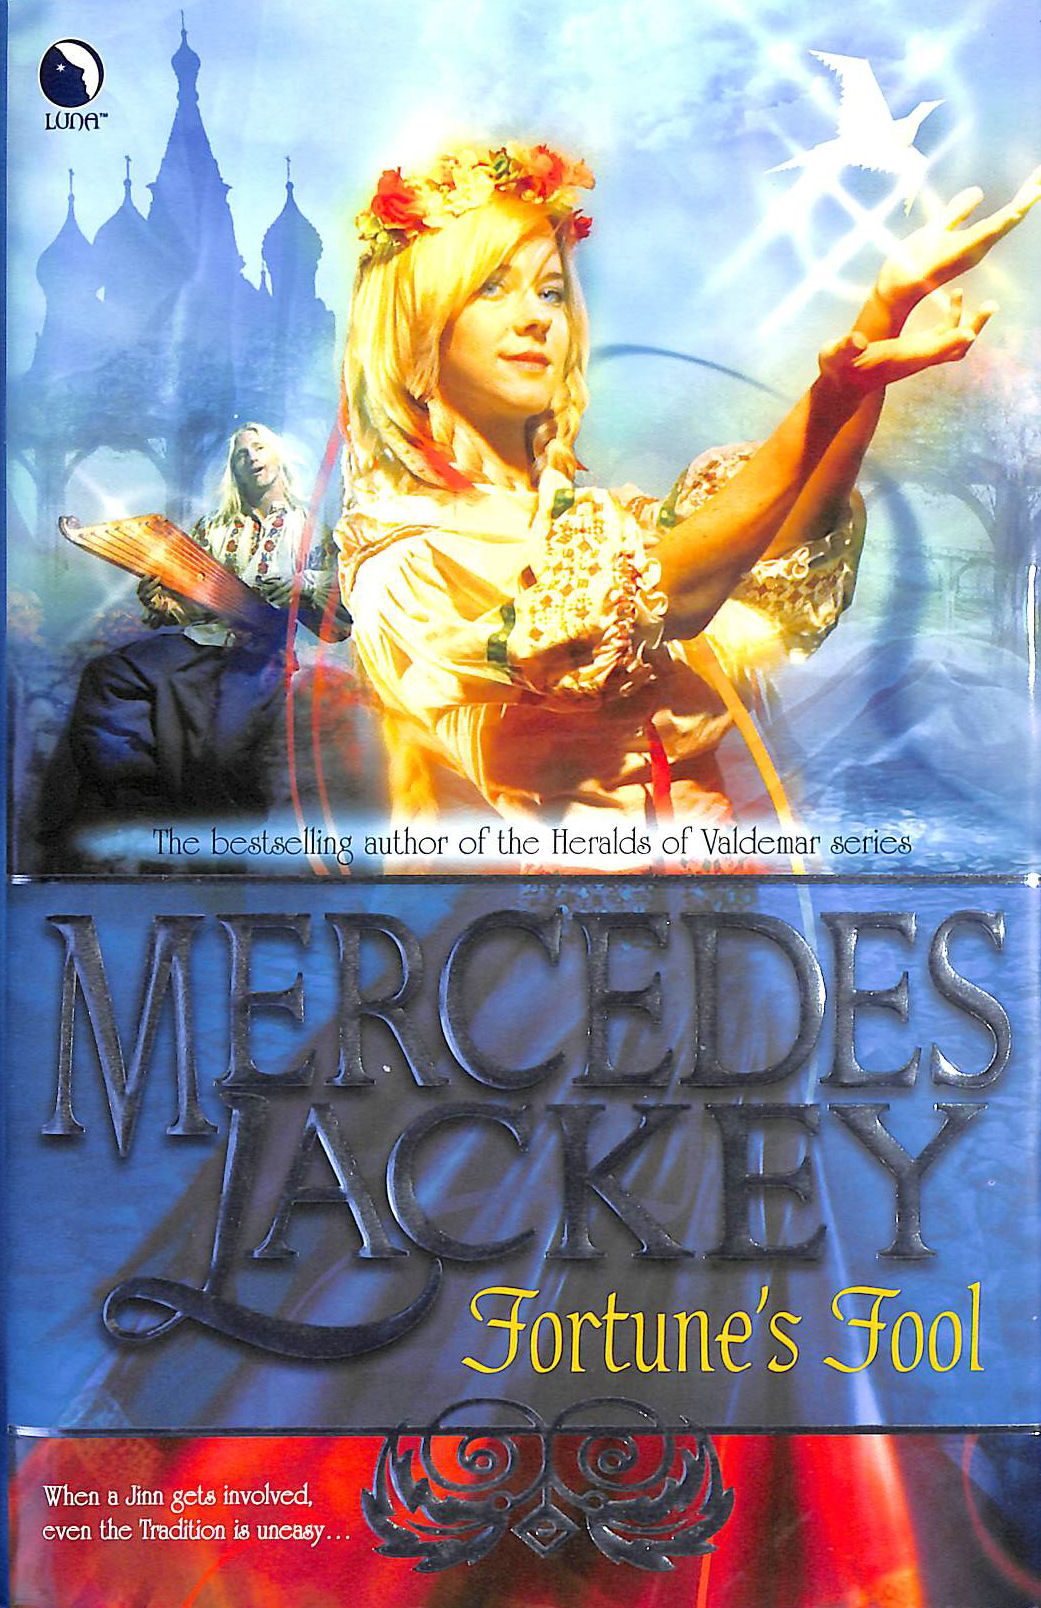 LACKEY, MERCEDES - Fortune's Fool (Tales of the Five Hundred Kingdoms, Book 3)